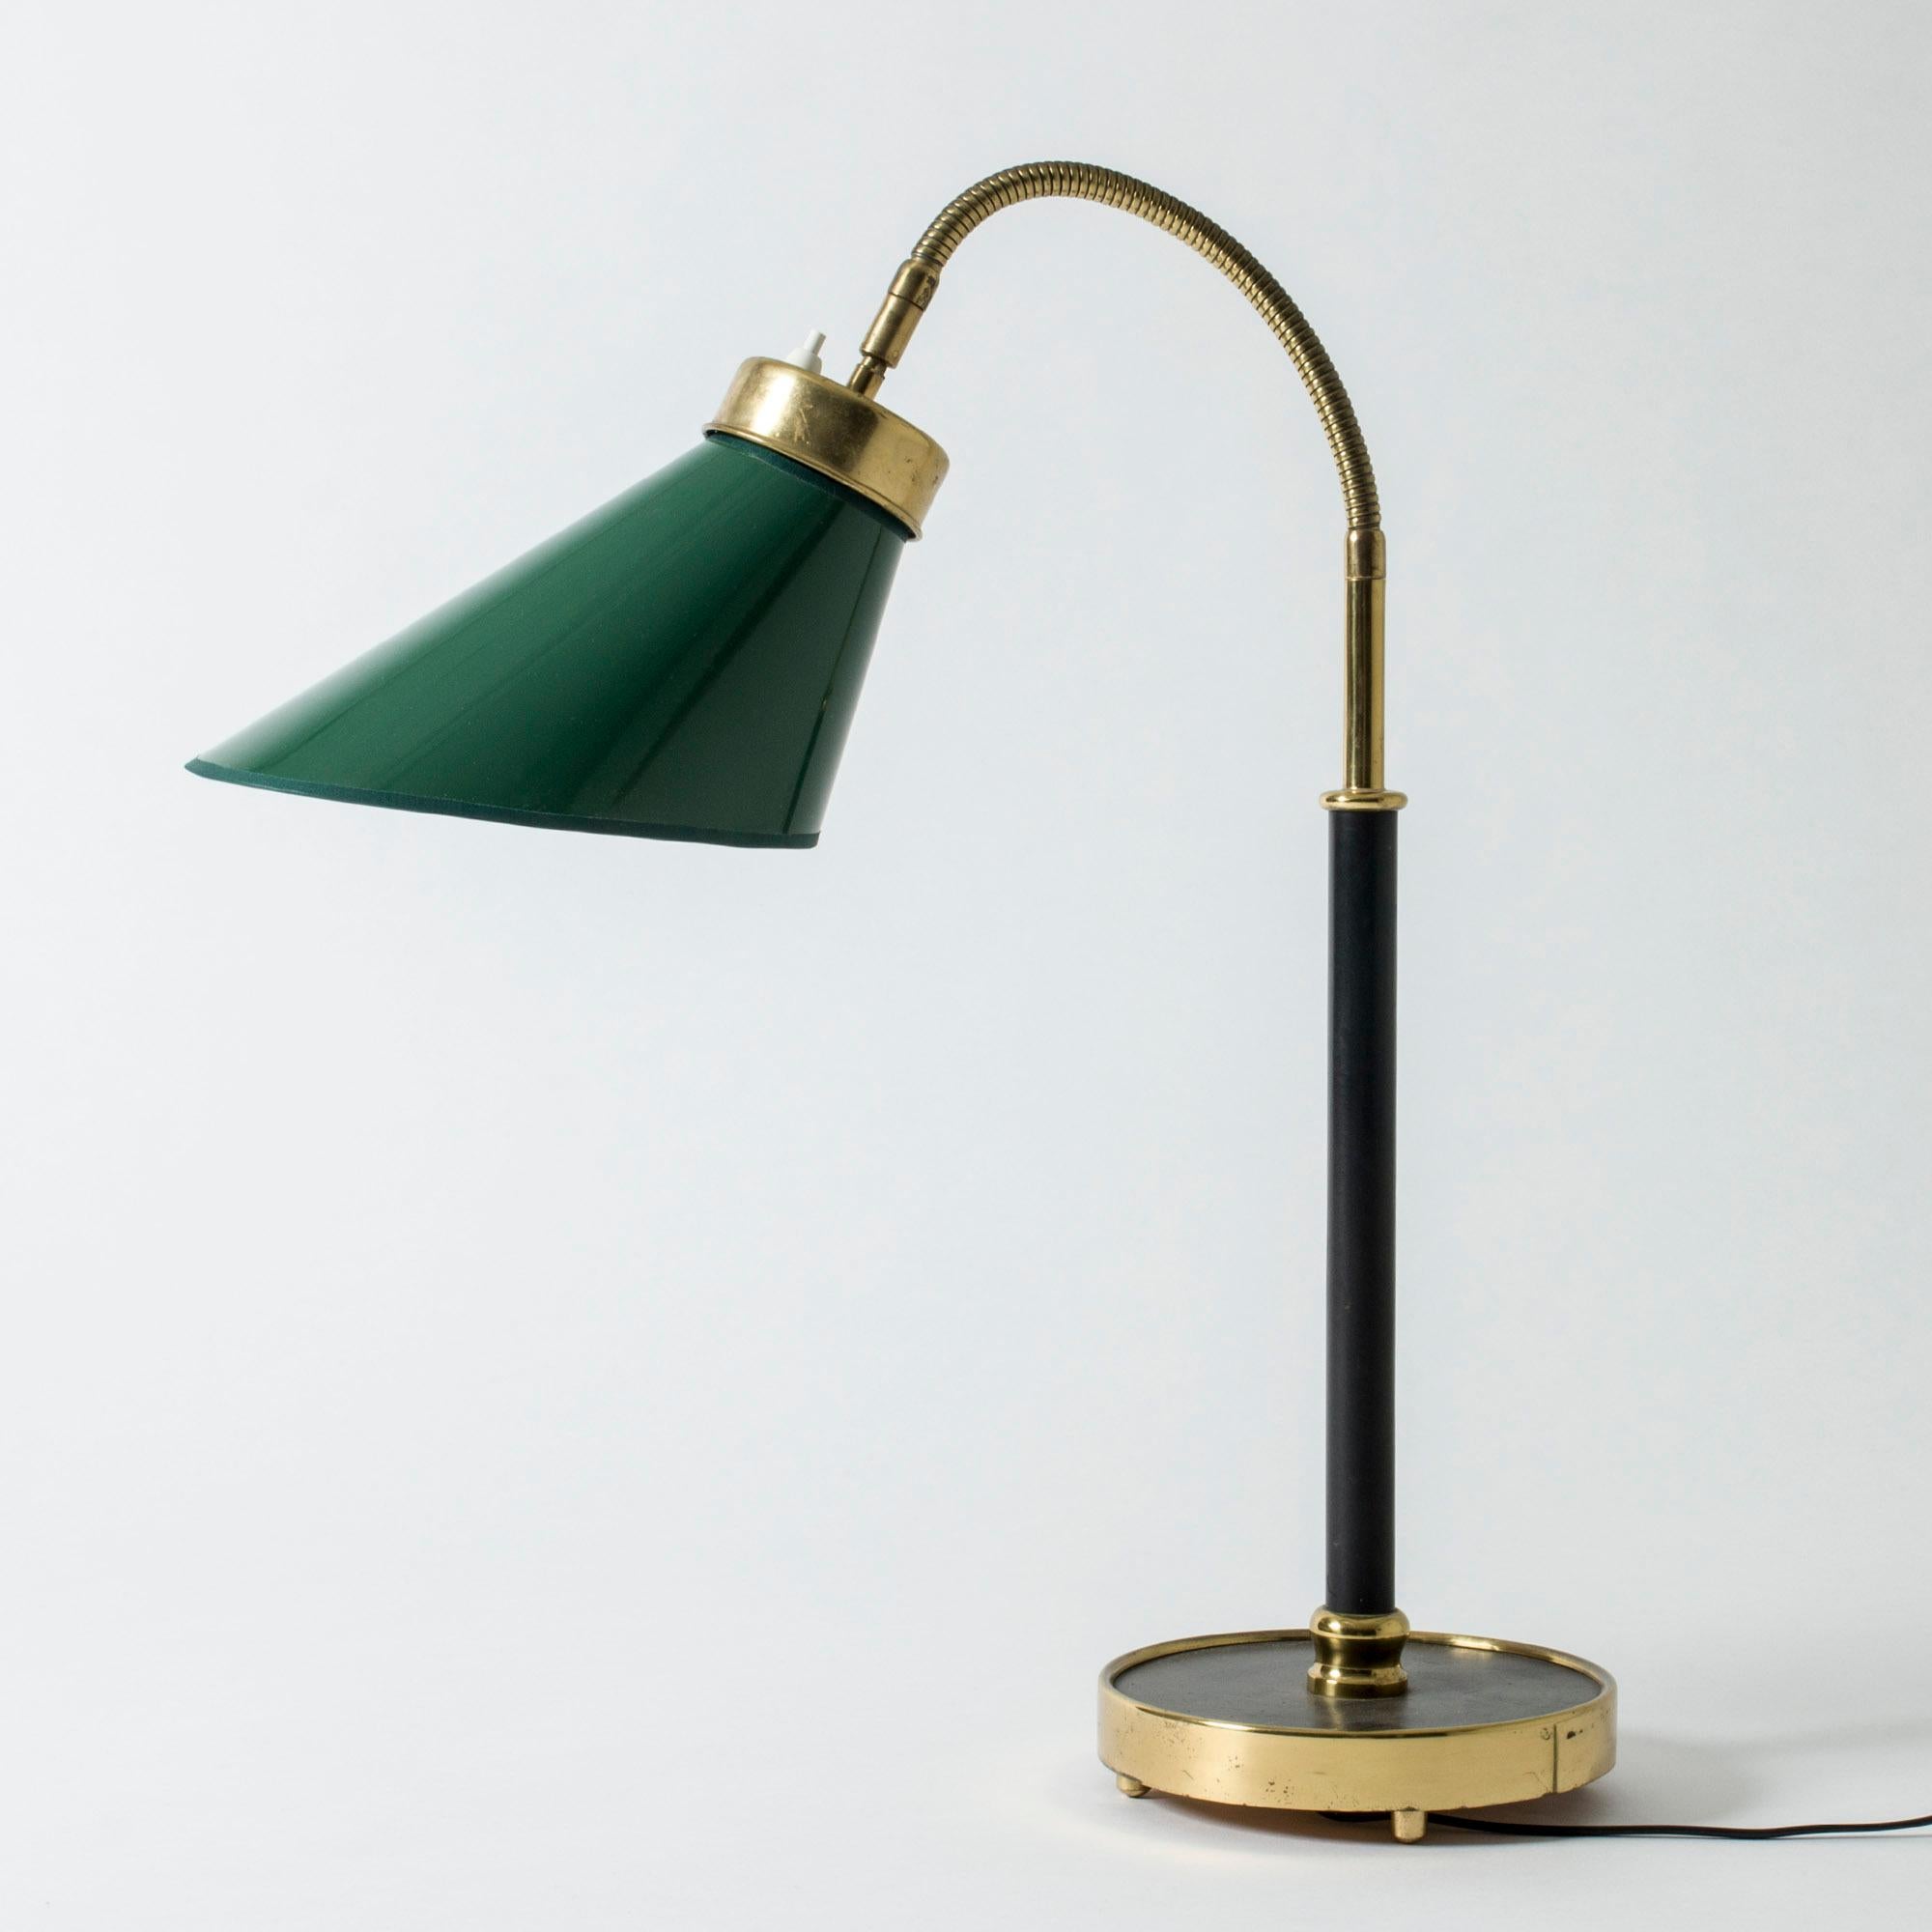 Very rare, elegant brass table or desk lamp by Josef Frank, with a dark green shade. Original black leather upholstery on the stem and base. Flexible neck and decorative round brass feet.